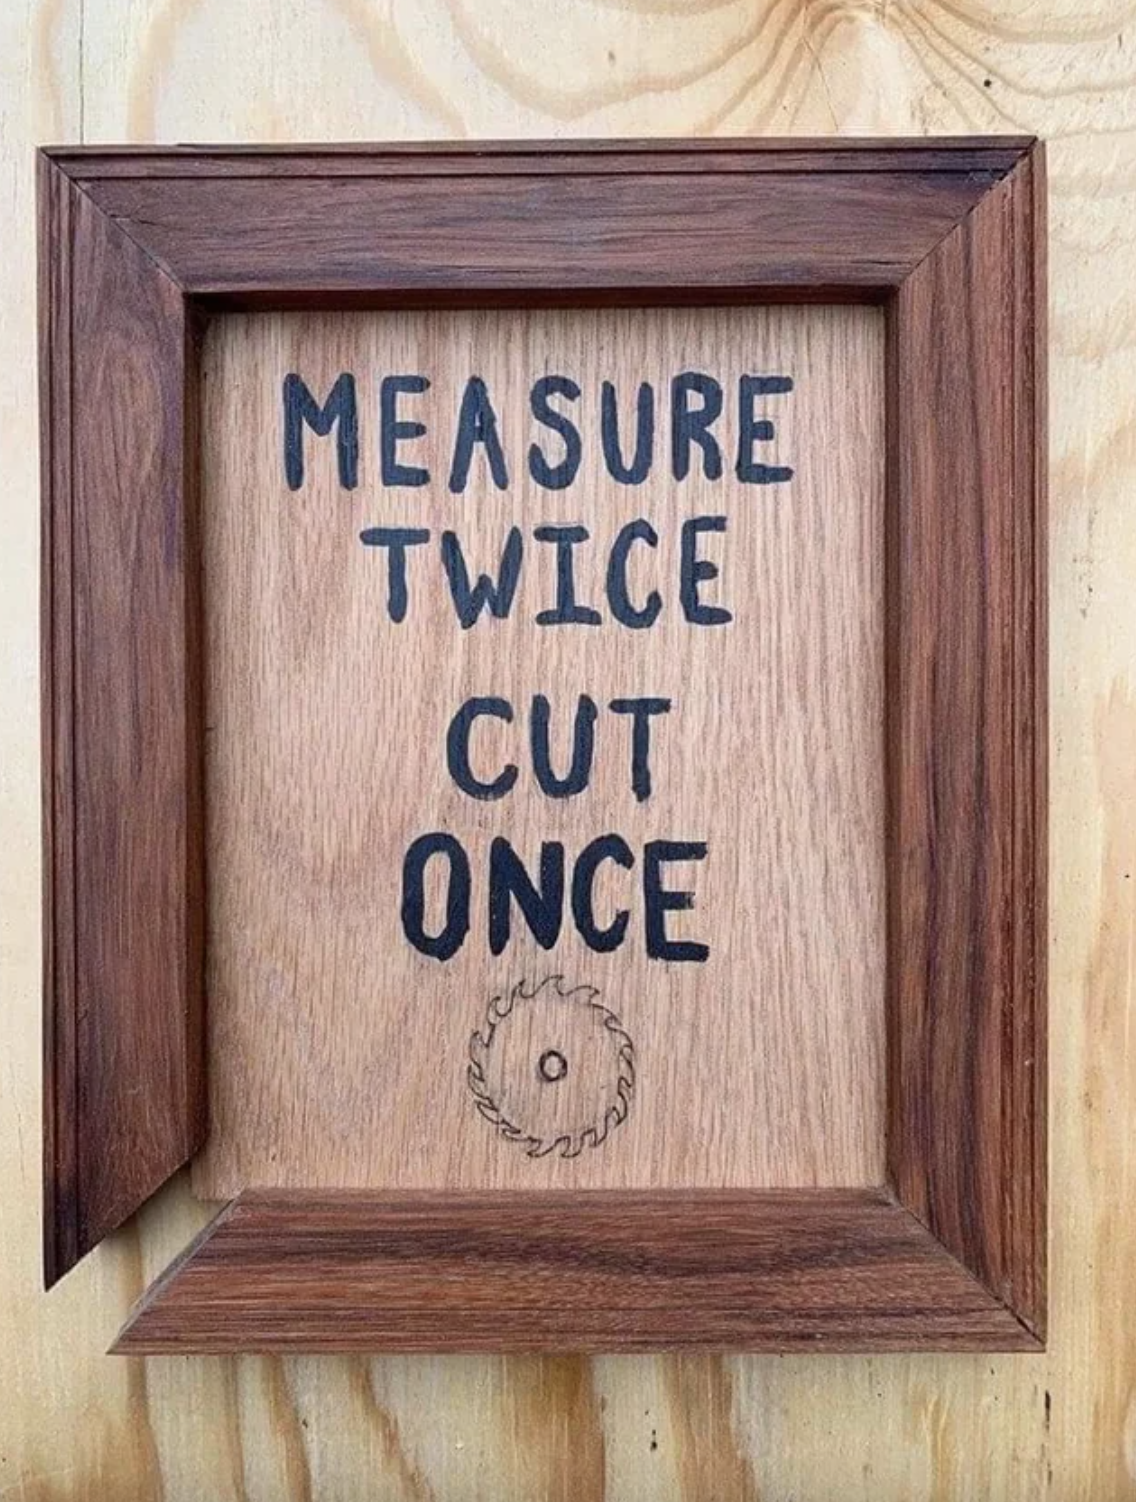 Wooden framed sign with text &quot;MEASURE TWICE CUT ONCE&quot; above a saw blade illustration